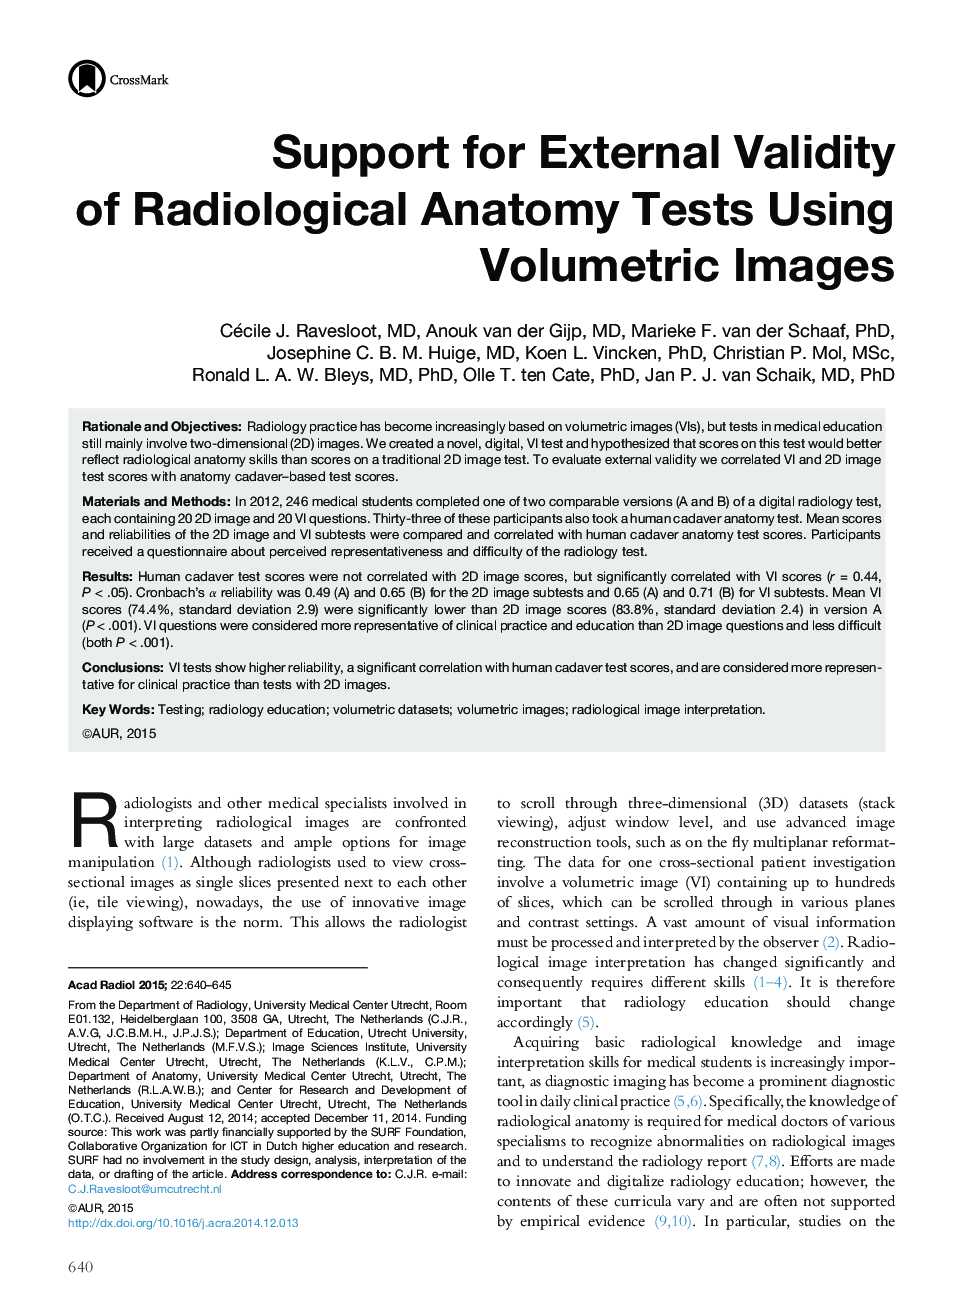 Support for External Validity of Radiological Anatomy Tests Using Volumetric Images